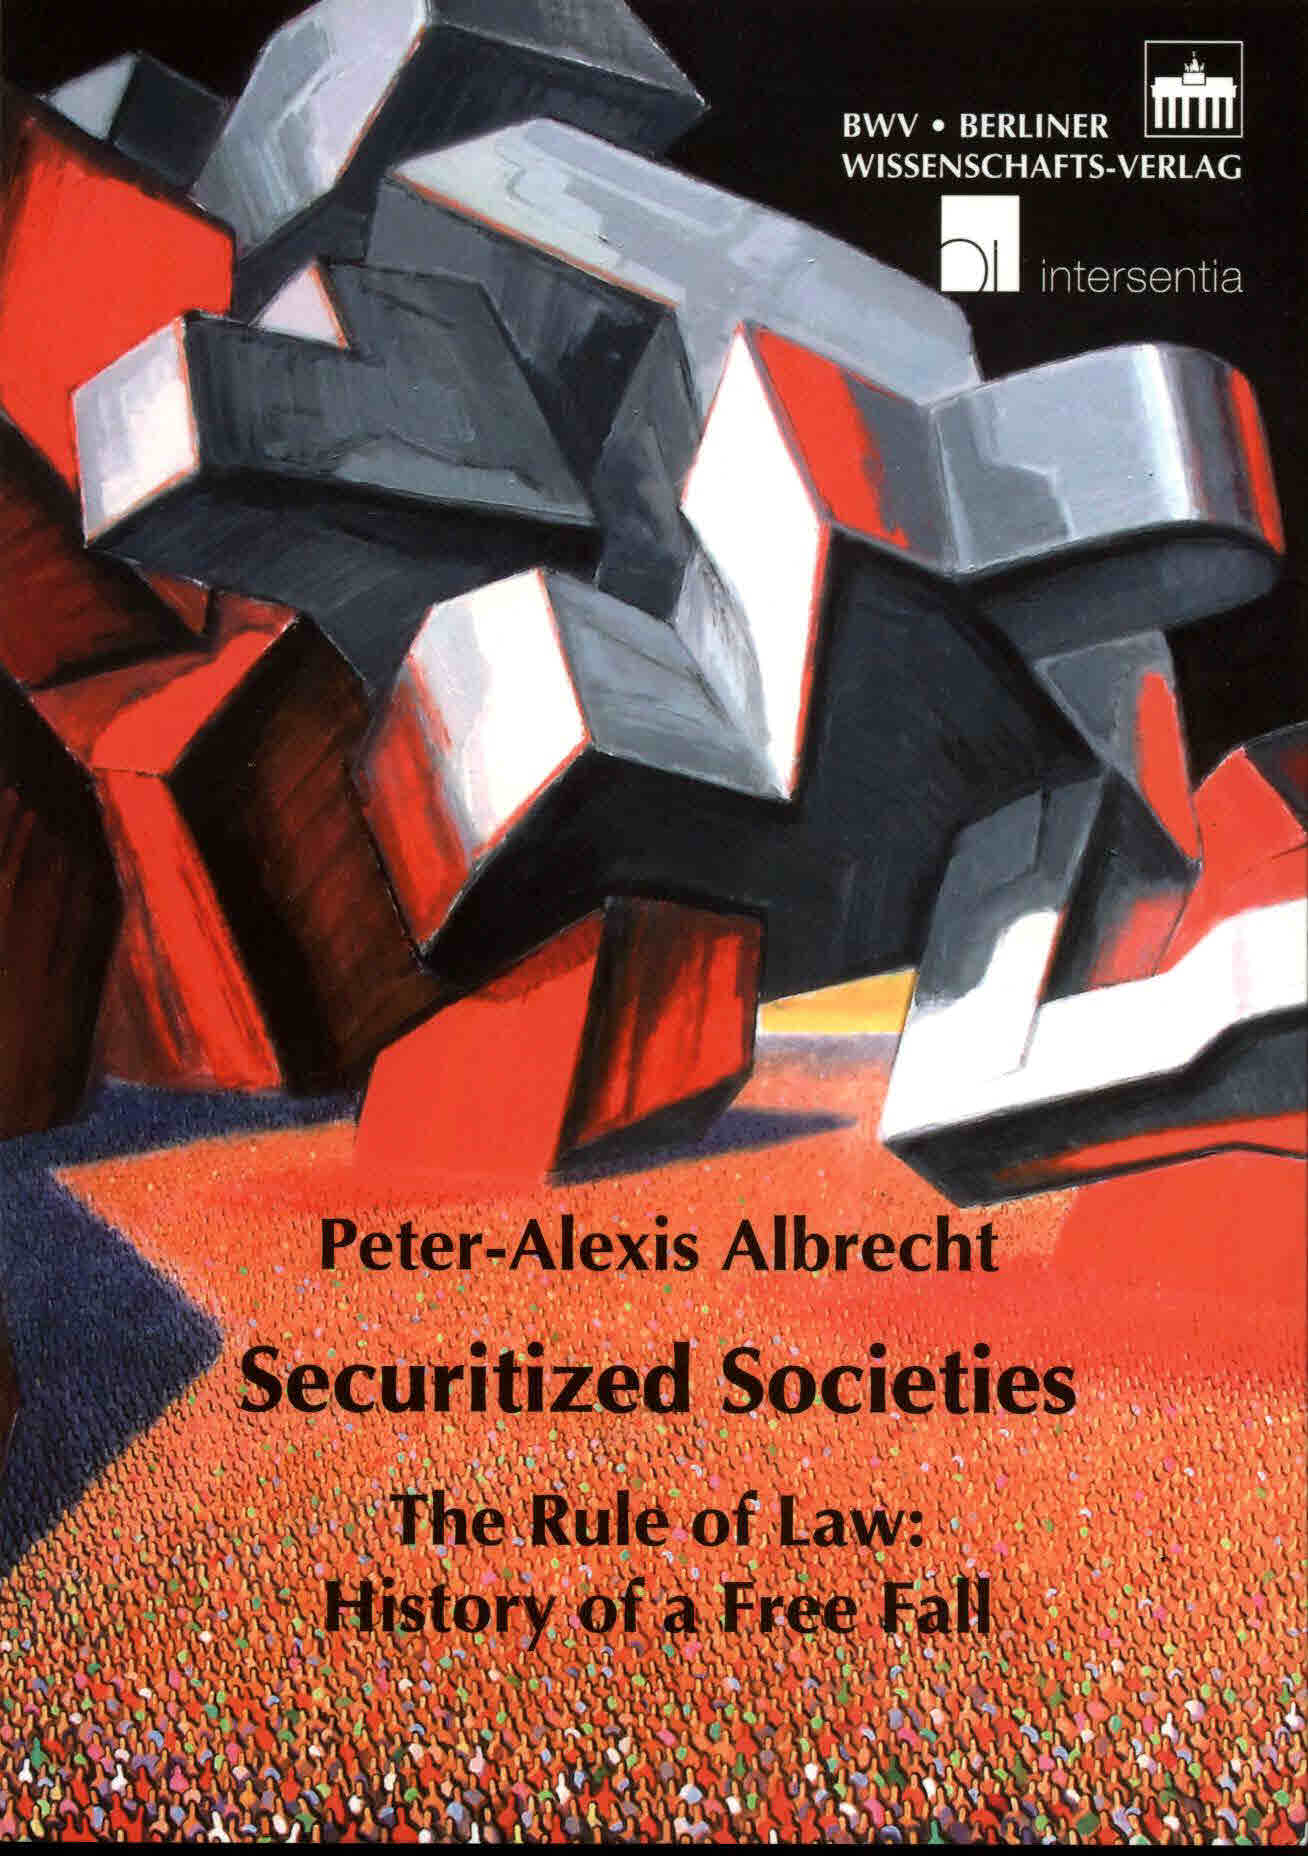 Securitized societies. The rule of law: history of a free fall